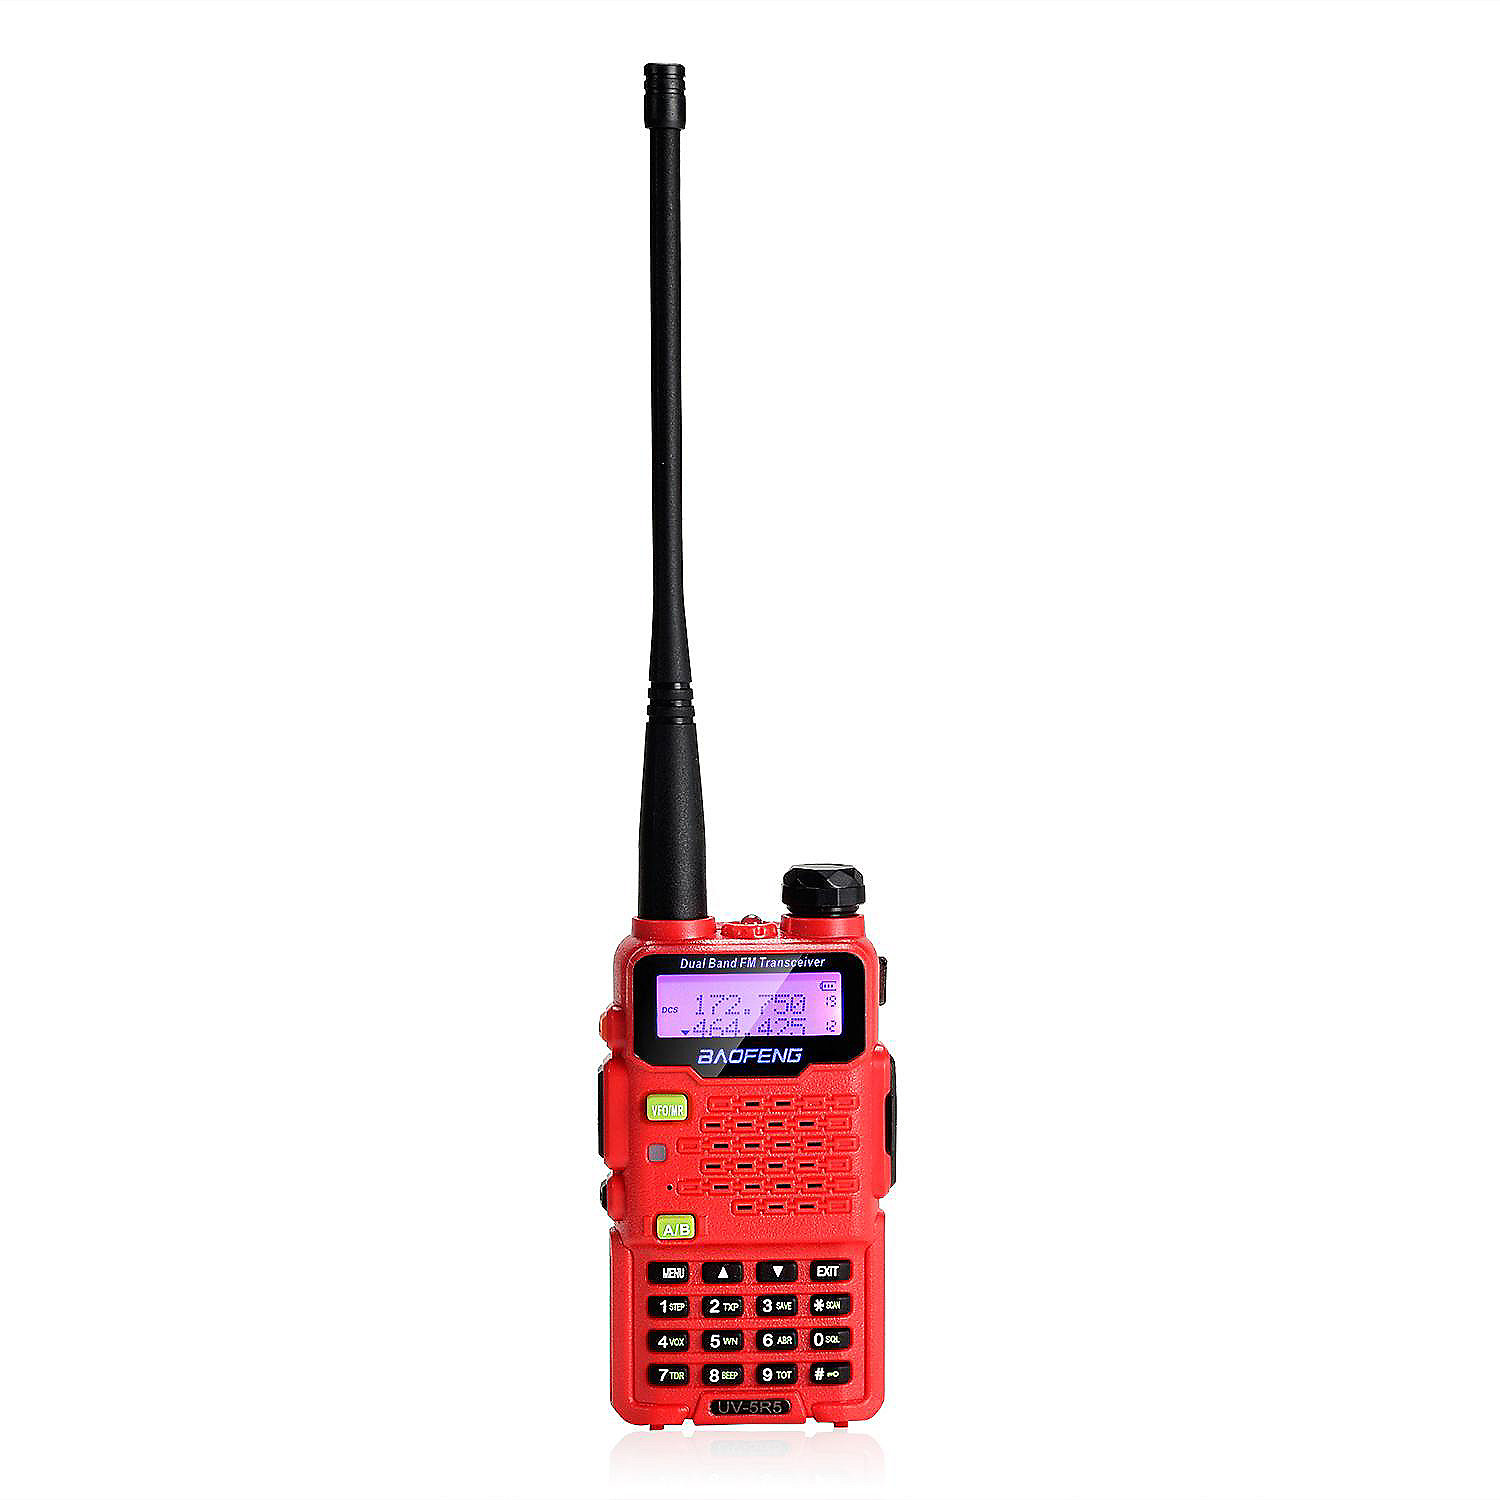 Camo BAOFENG UV-5R5 5-Watt Dual Band Two-Way Radio 144-148MHz VHF & 420-450MHz UHF Includes Full Kit with Large Battery 